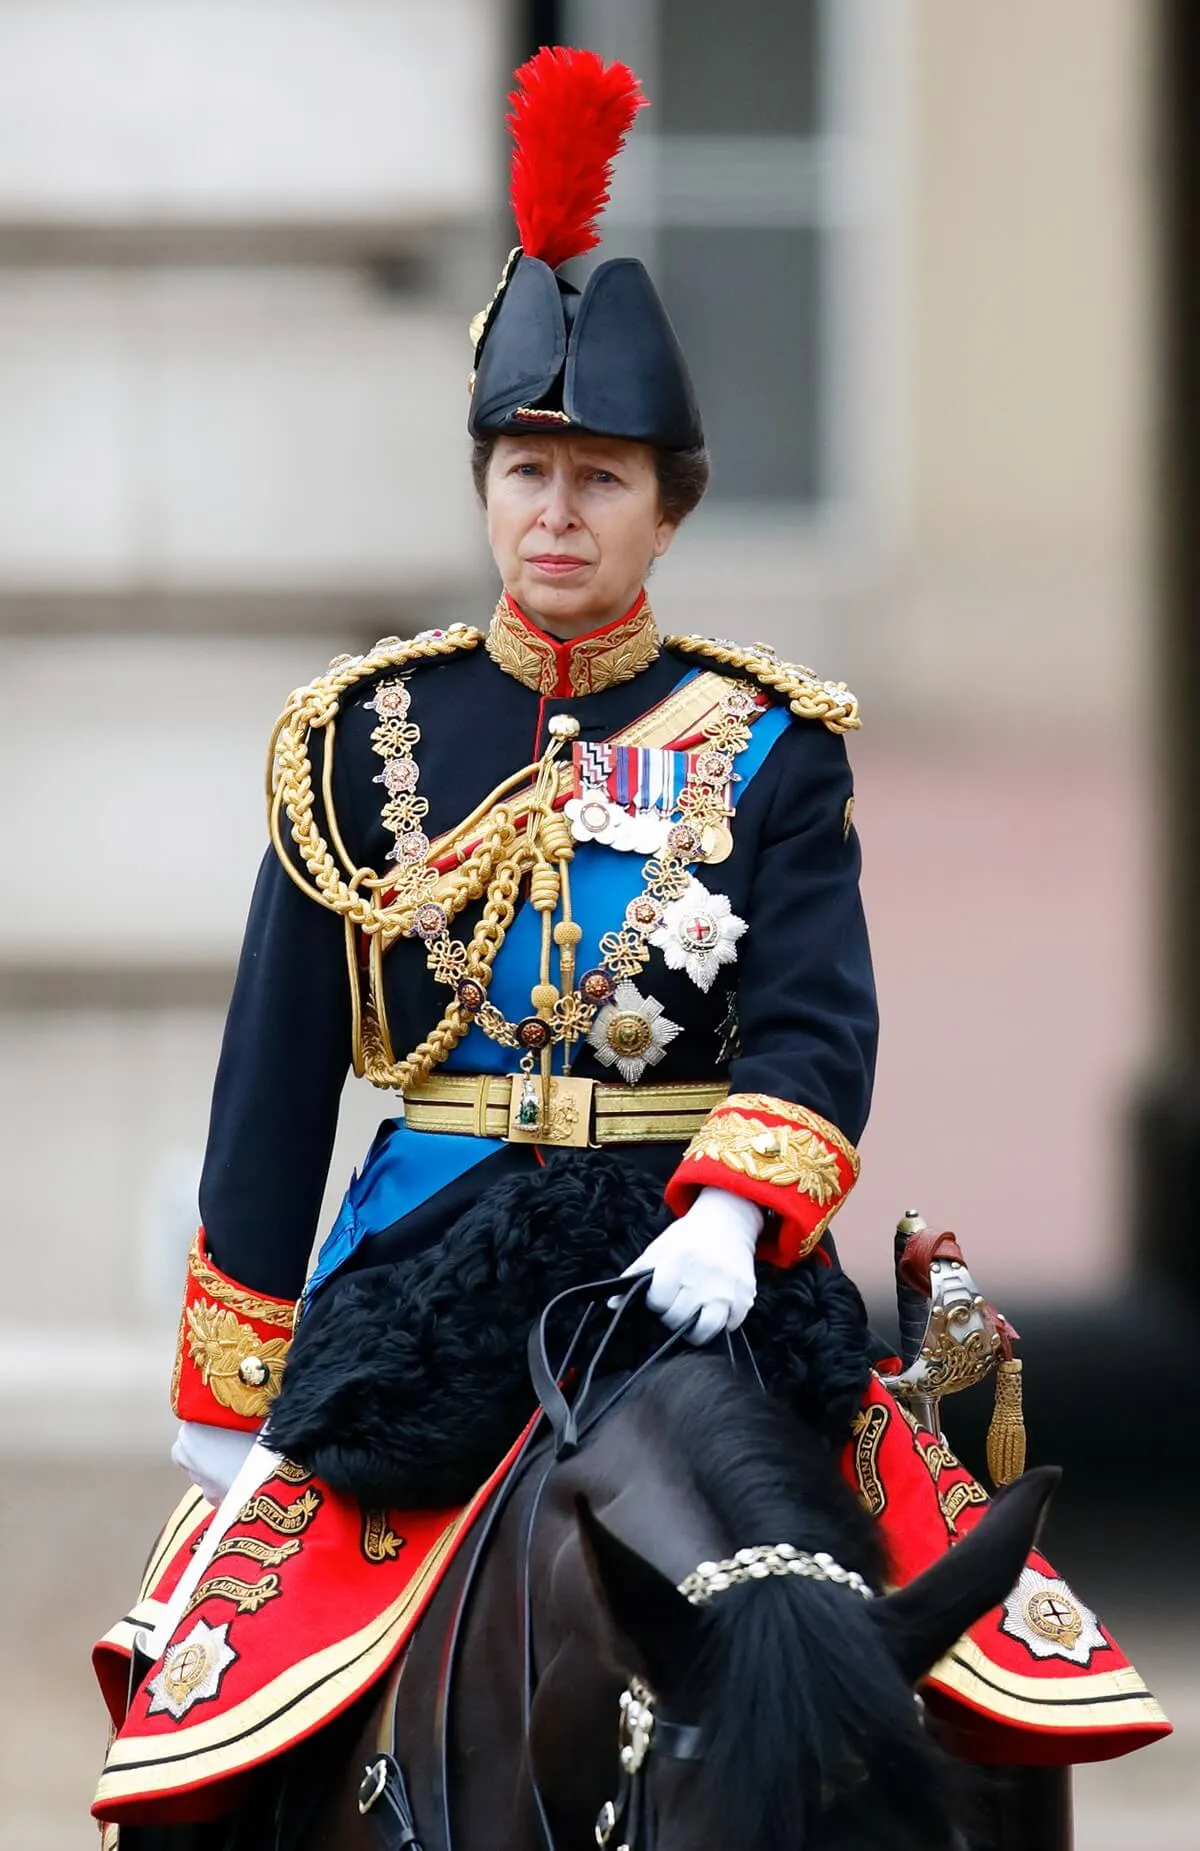 Princess Anne takes part, riding on horseback, in the annual Trooping the Colour parade